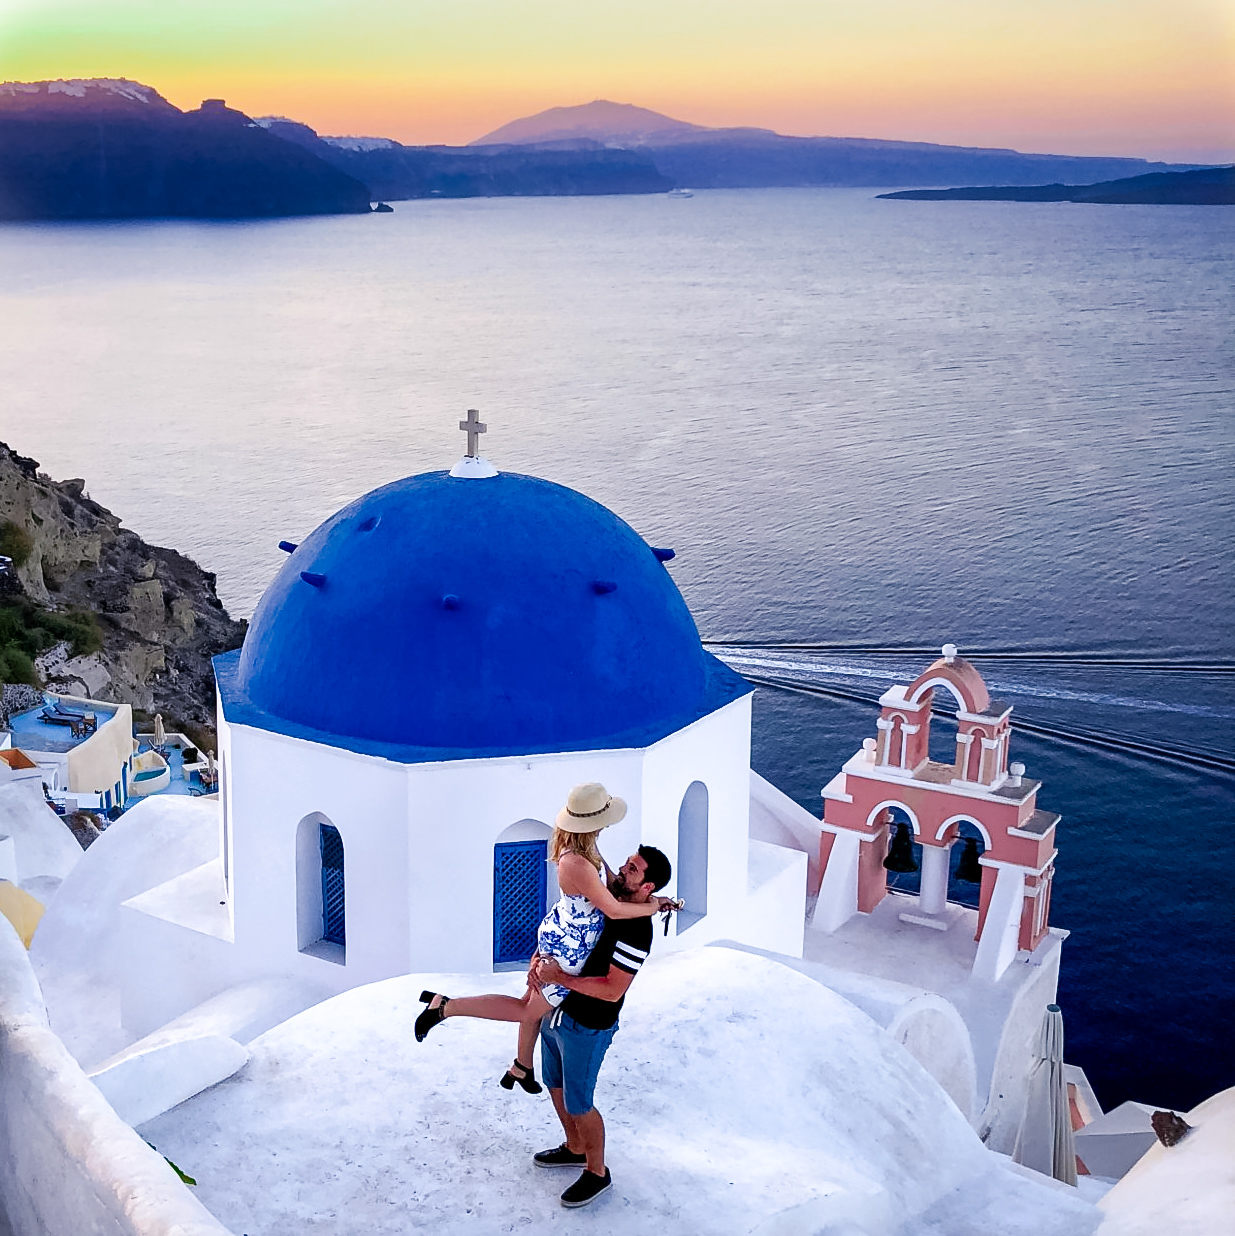 Santorini's 42 Most-Instagrammed Places